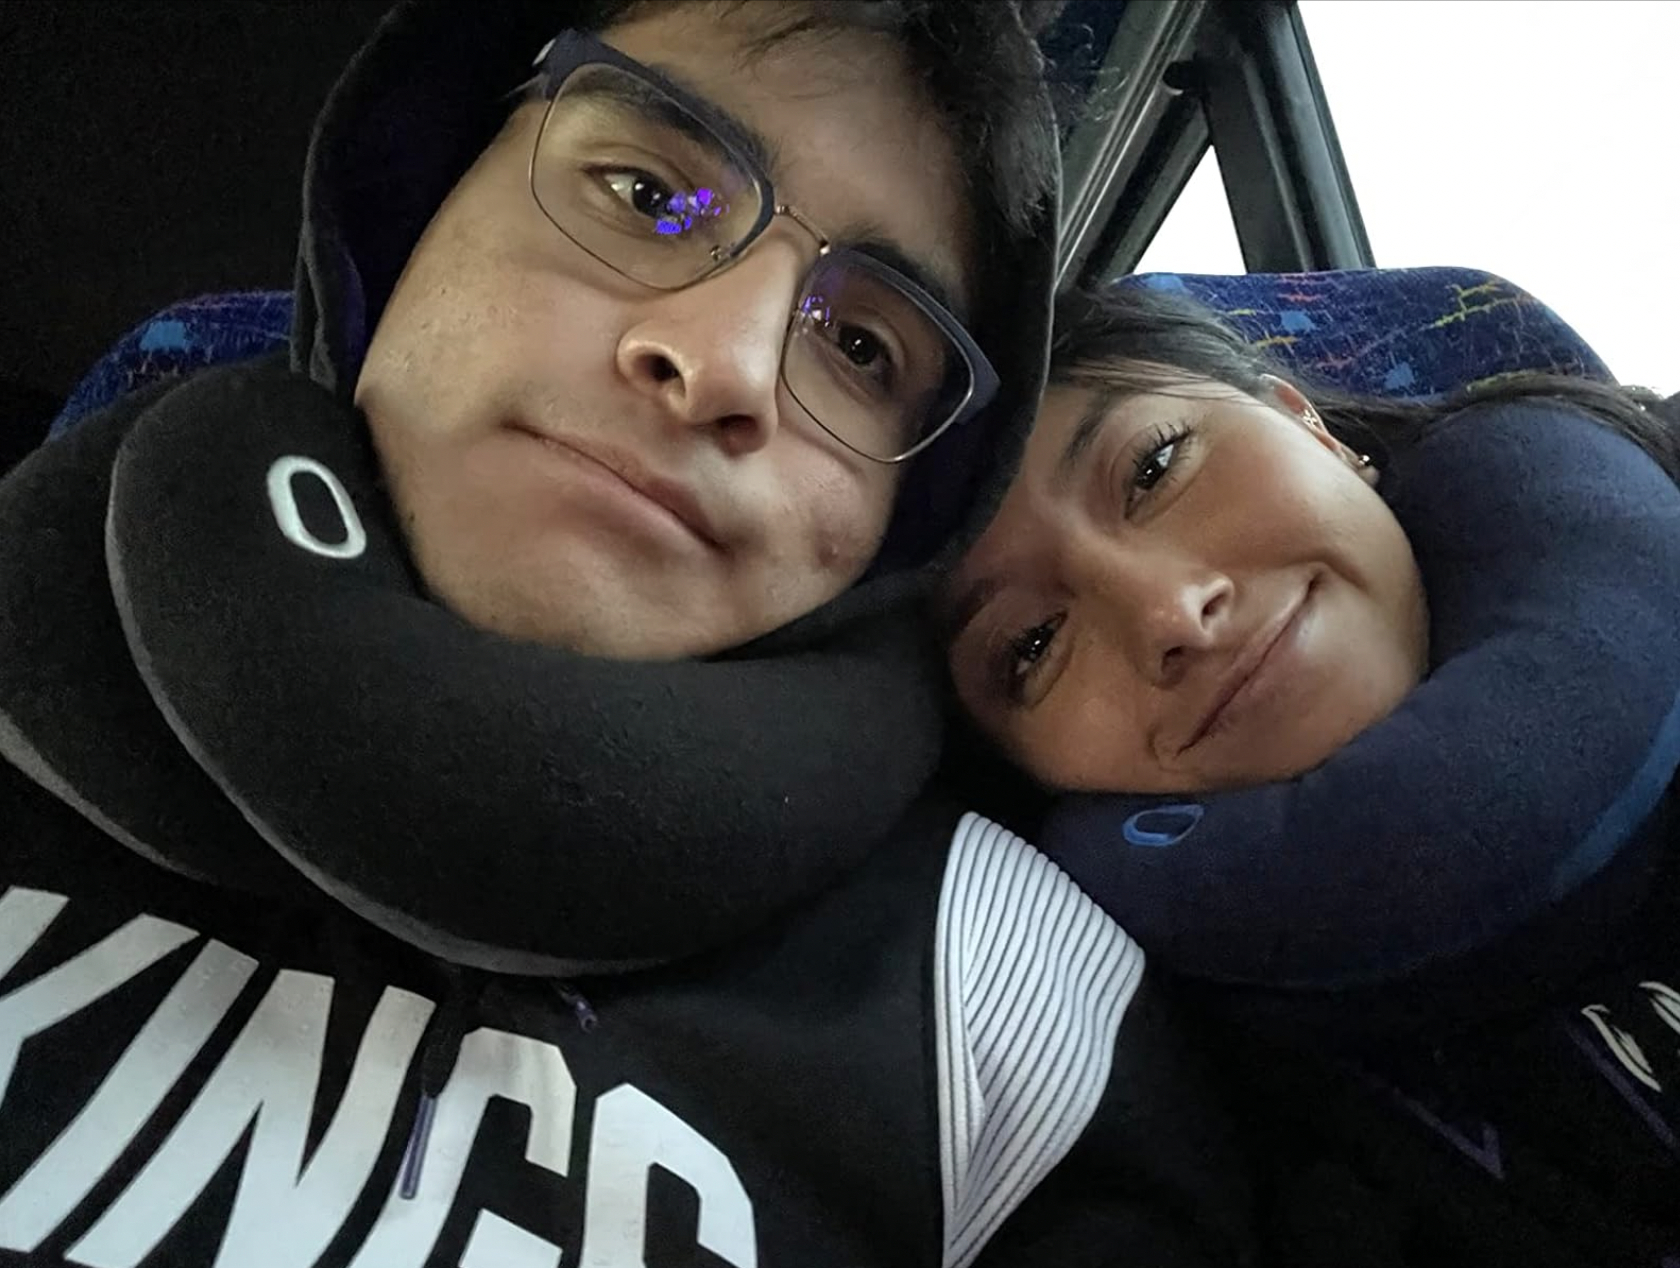 Two people with travel pillows on a bus, one wearing glasses and a hoodie, the other leaning on their shoulder